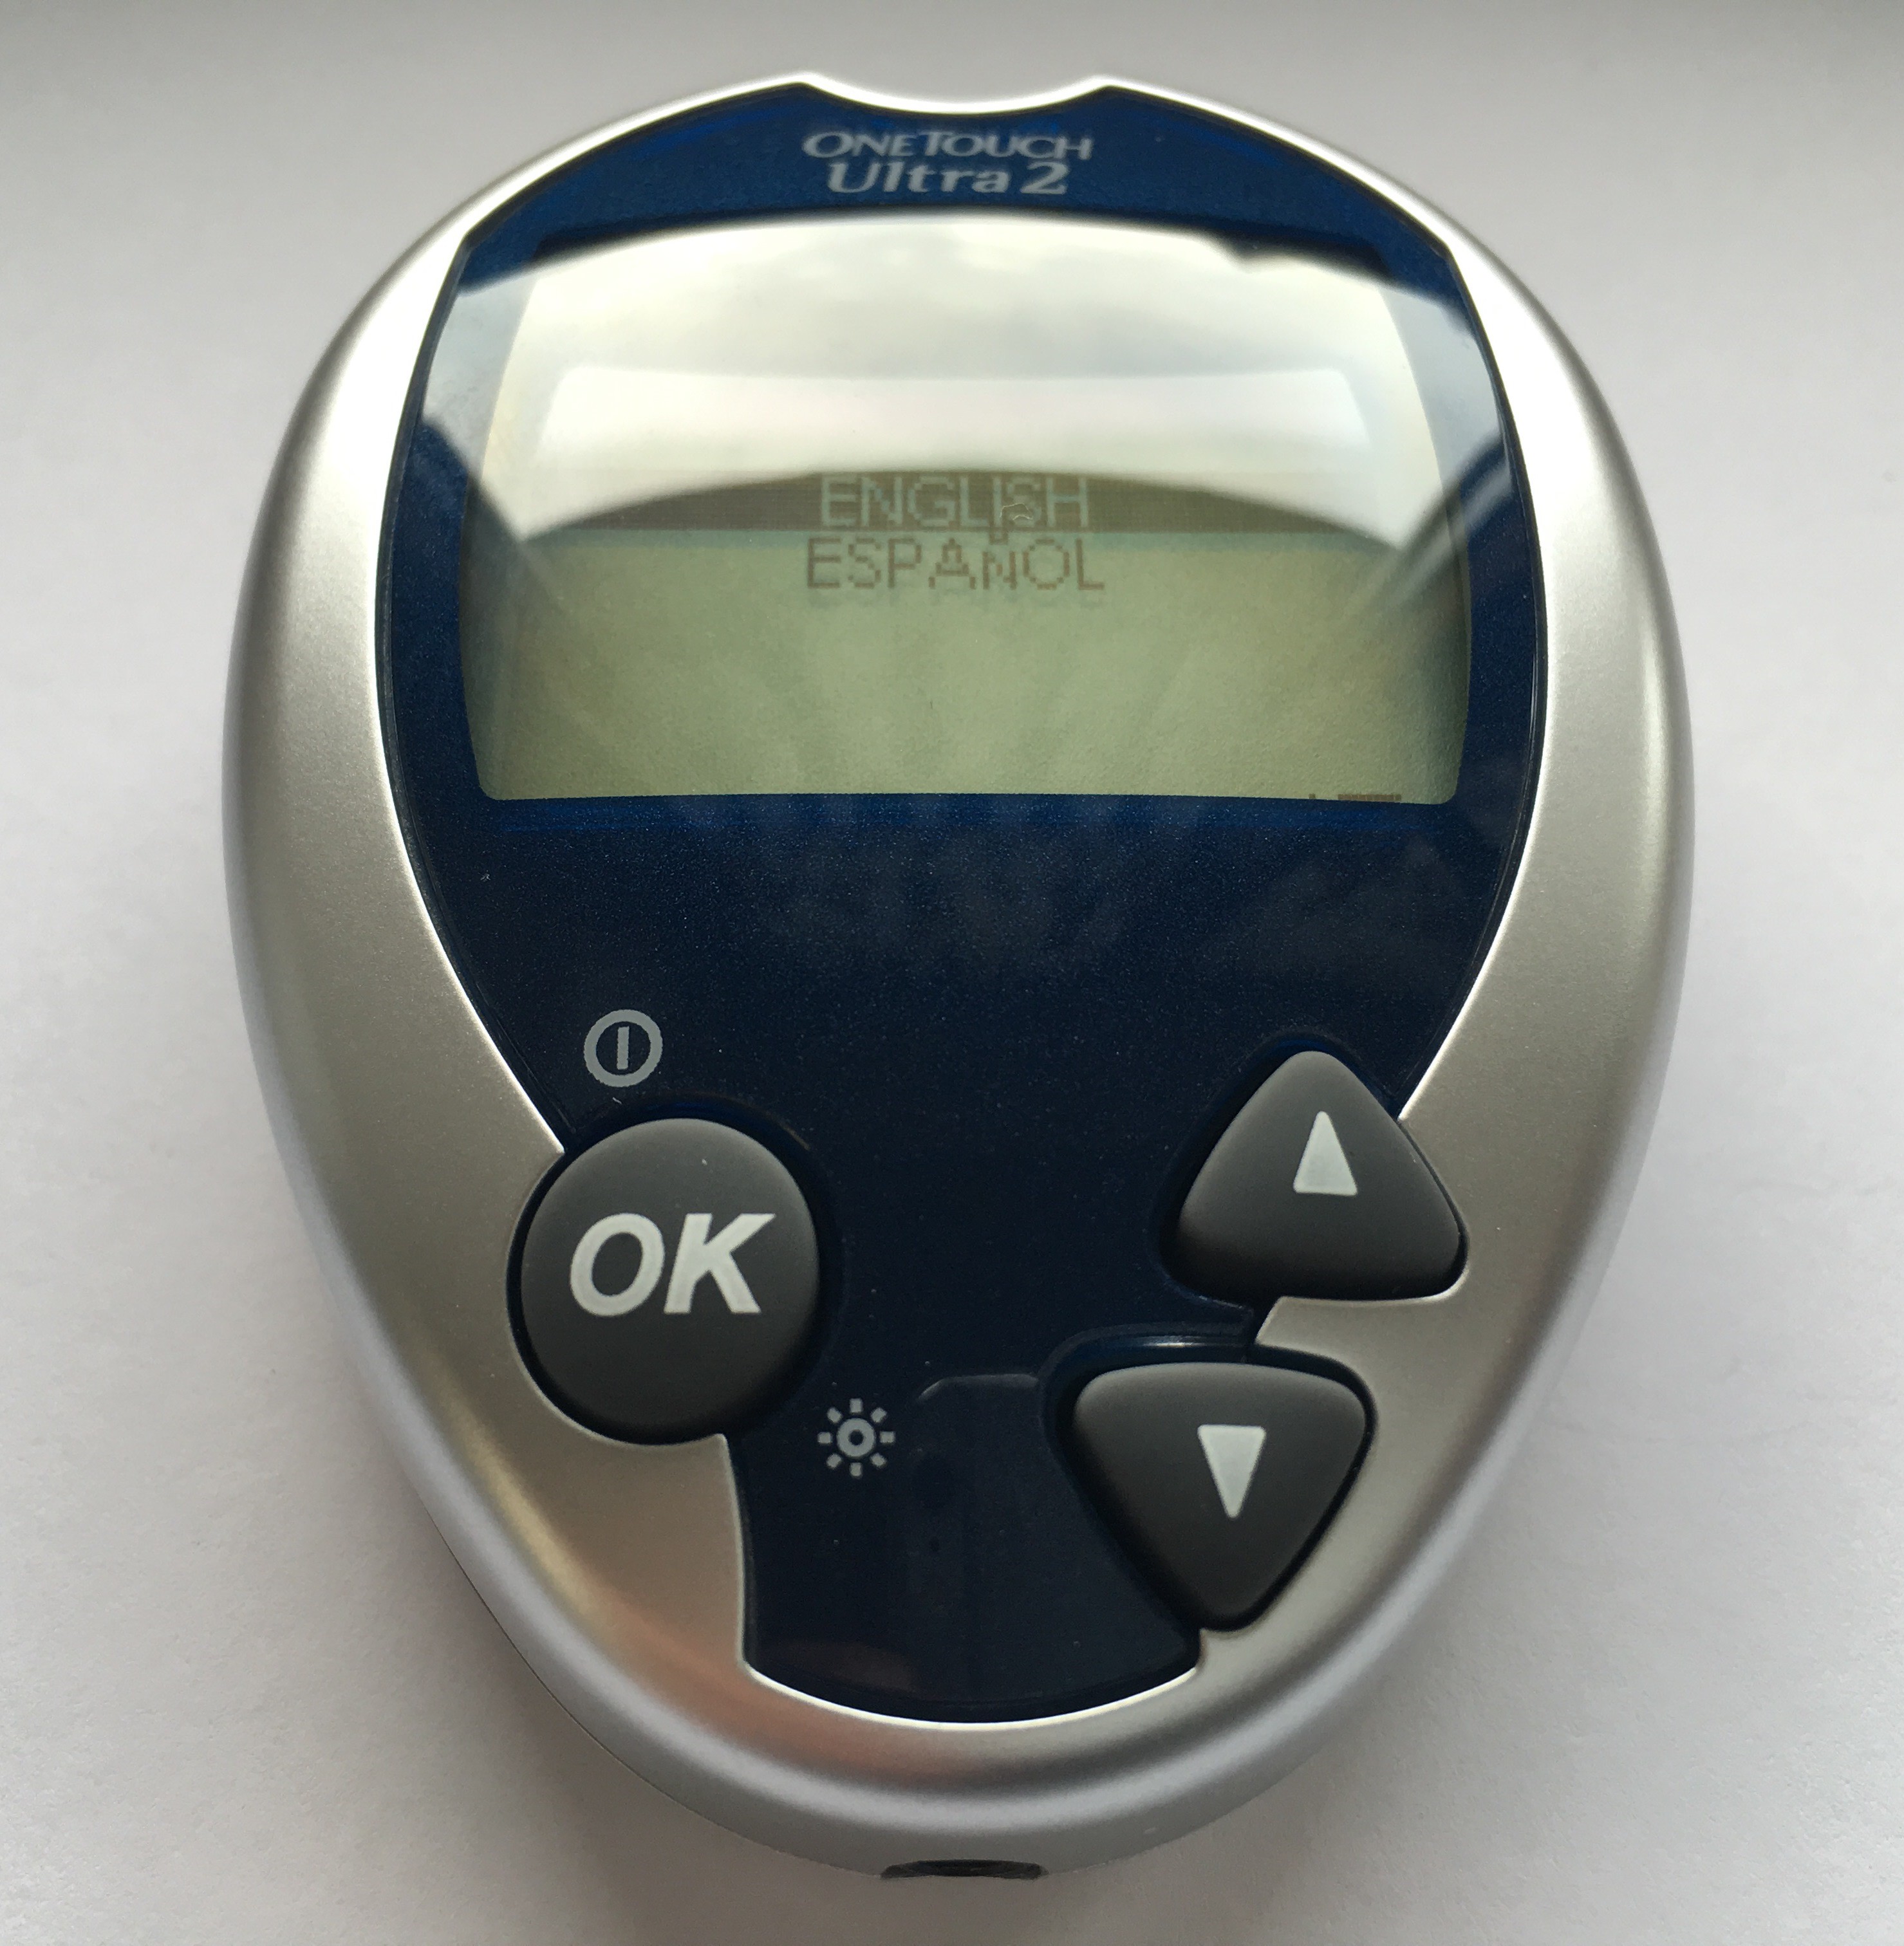 What are calibration instructions for a glucose meter?